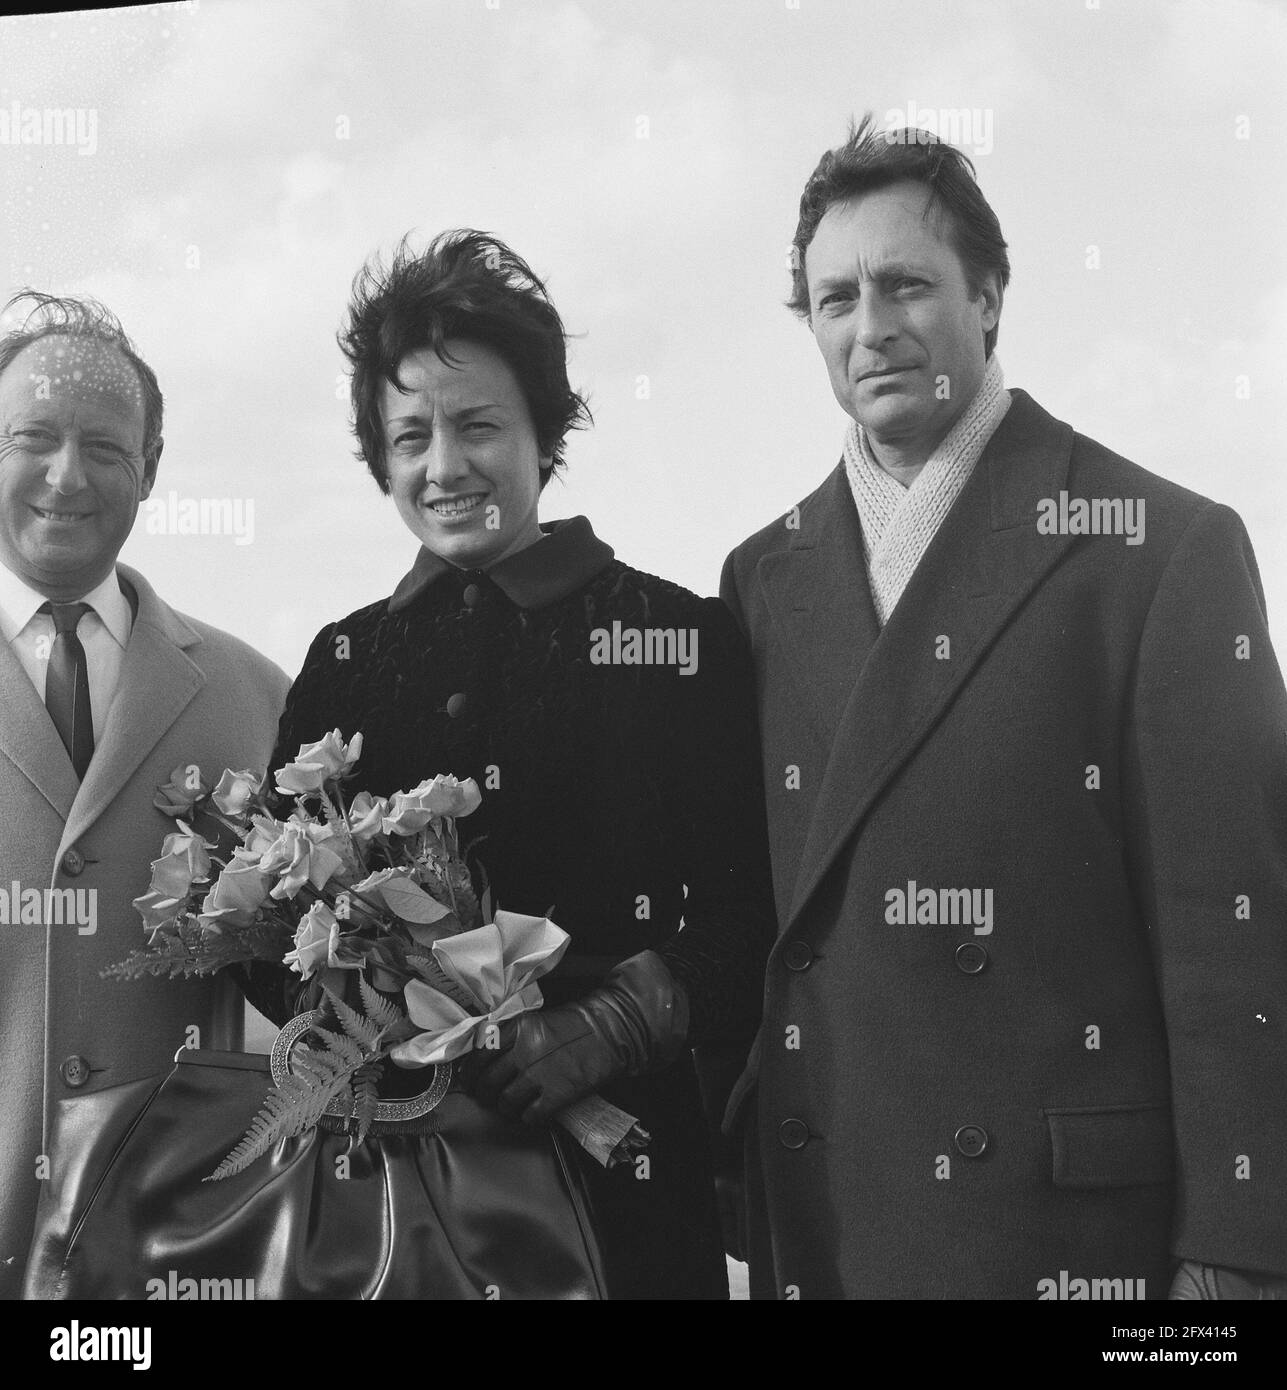 arrival and departure, conductors, women, flowers, Giulini, Carlo Maria, Girolami, Marcella de, October 29, 1965, arrival and departure, flowers, conductors, women, The Netherlands, 20th century press agency photo, news to remember, documentary, historic photography 1945-1990, visual stories, human history of the Twentieth Century, capturing moments in time Stock Photo